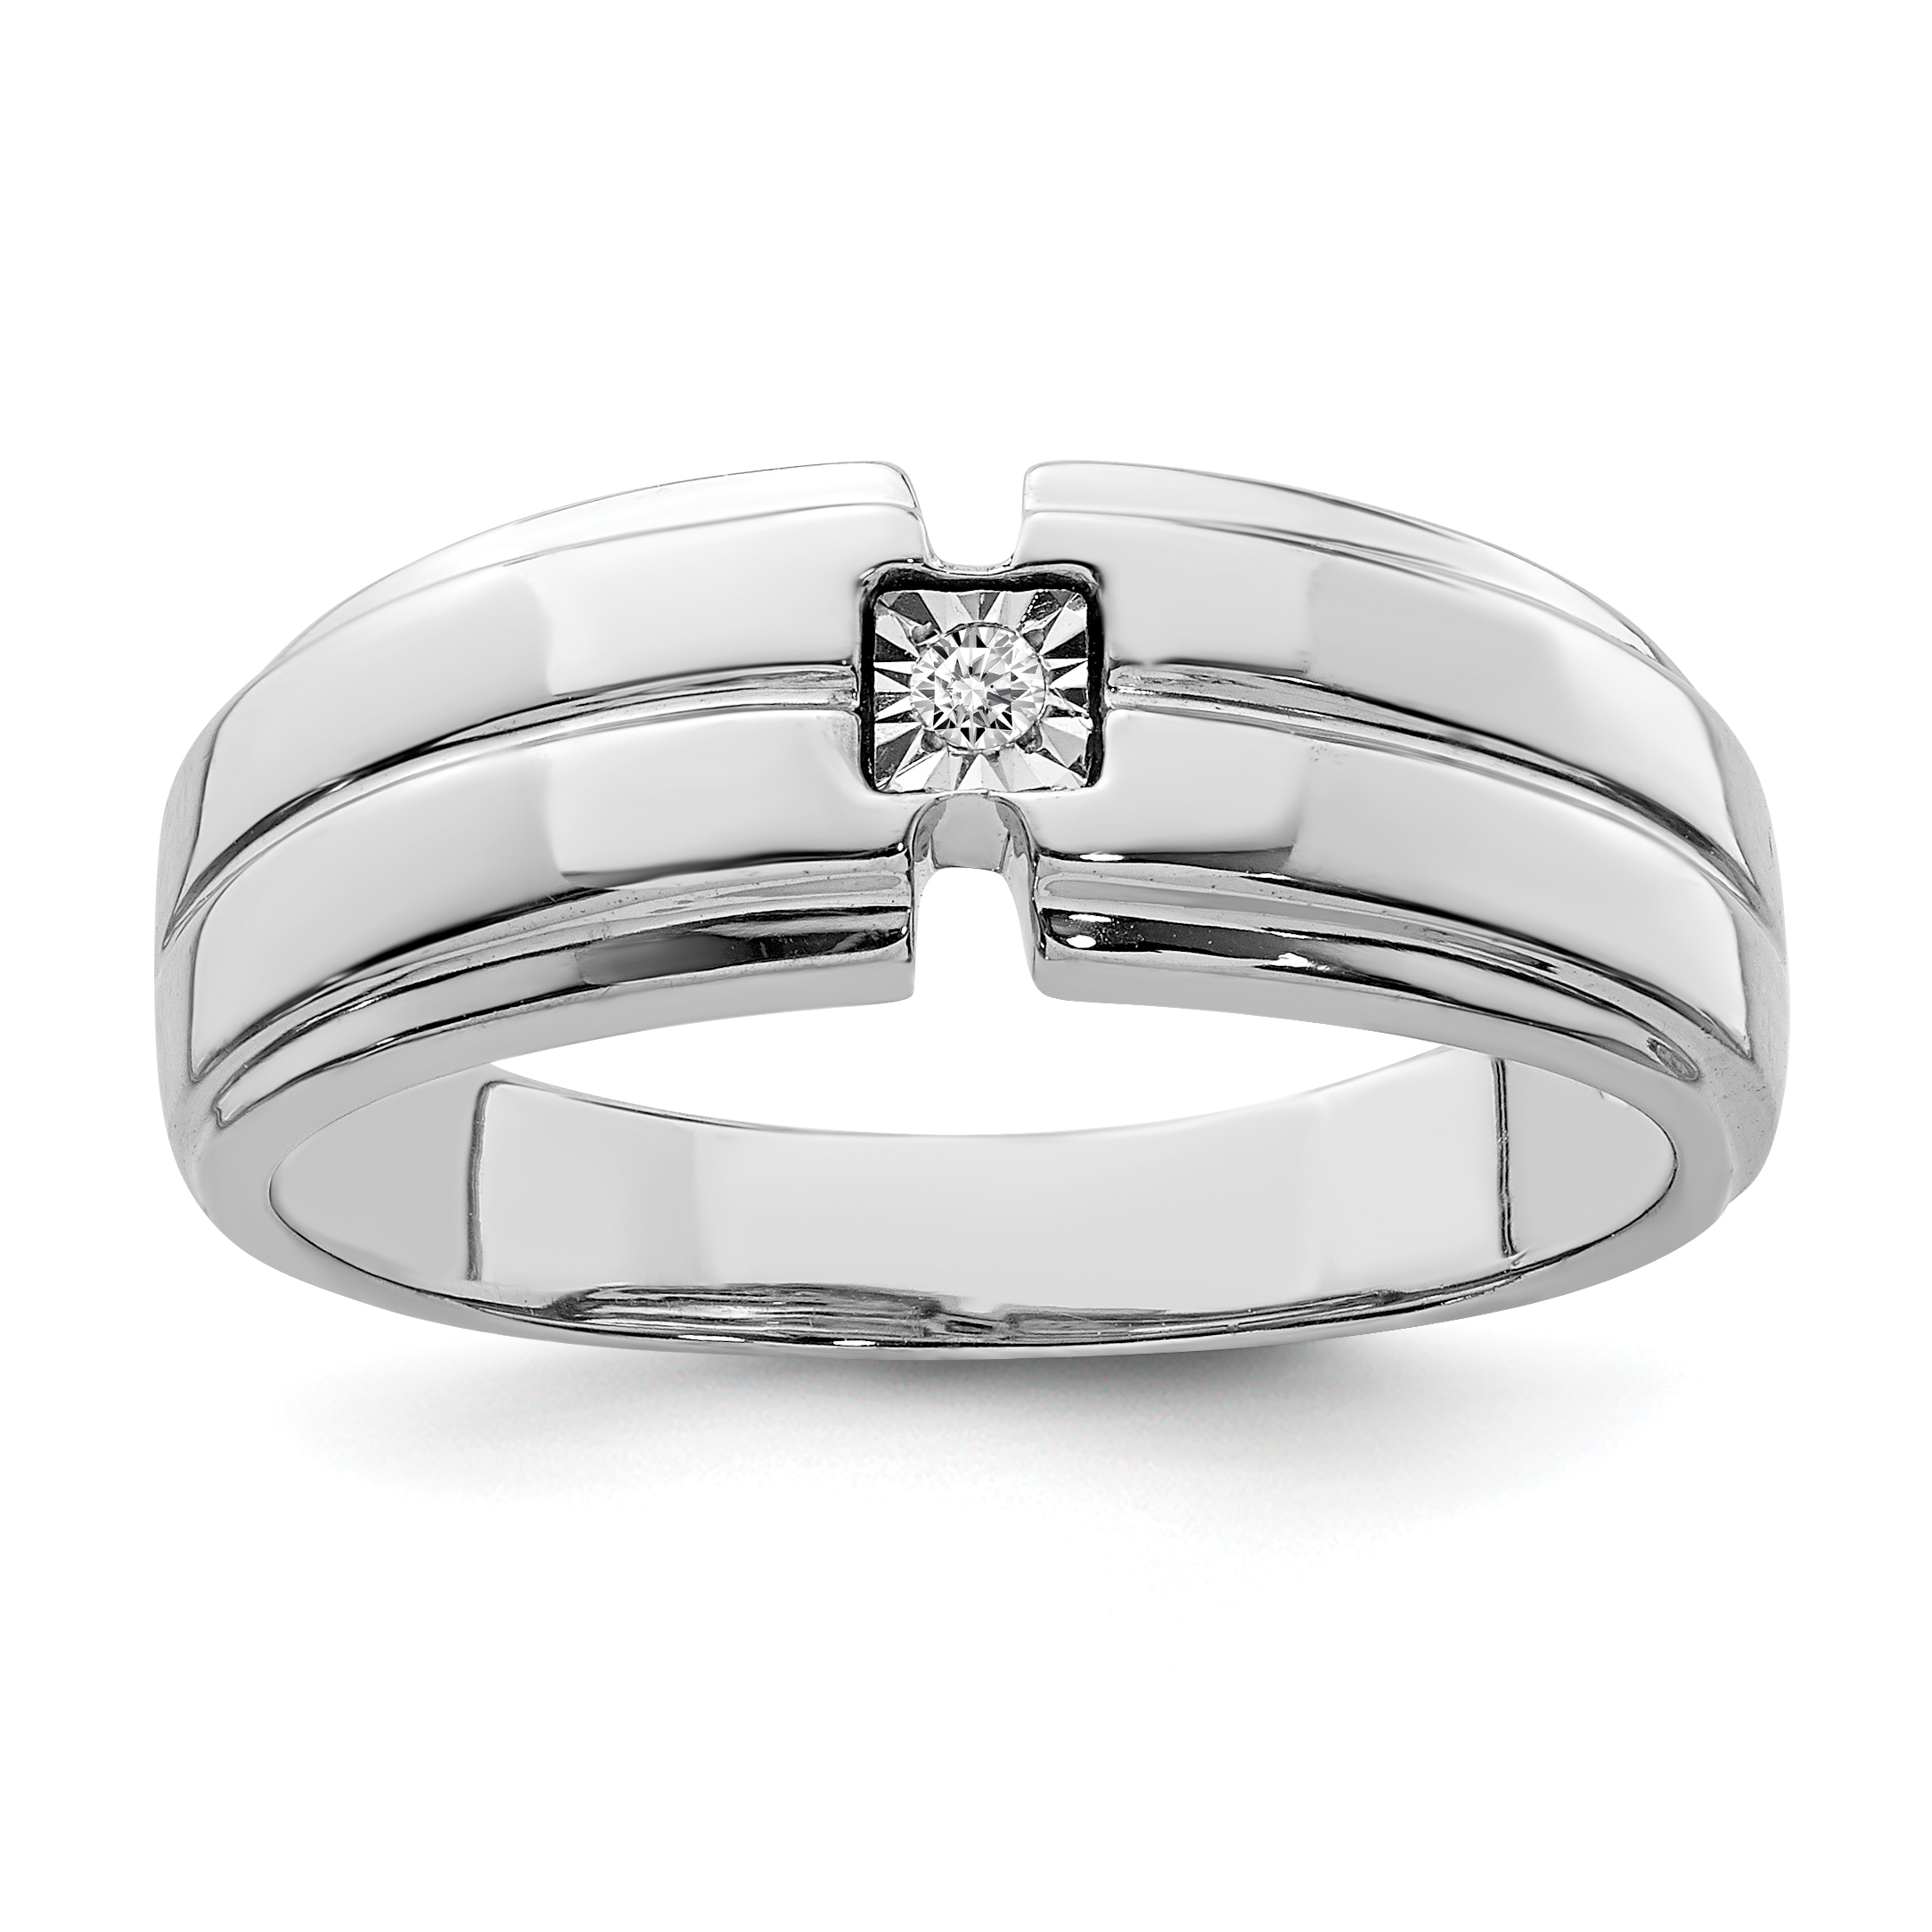 Core Silver Sterling Silver Men's Polished Diamond Ring